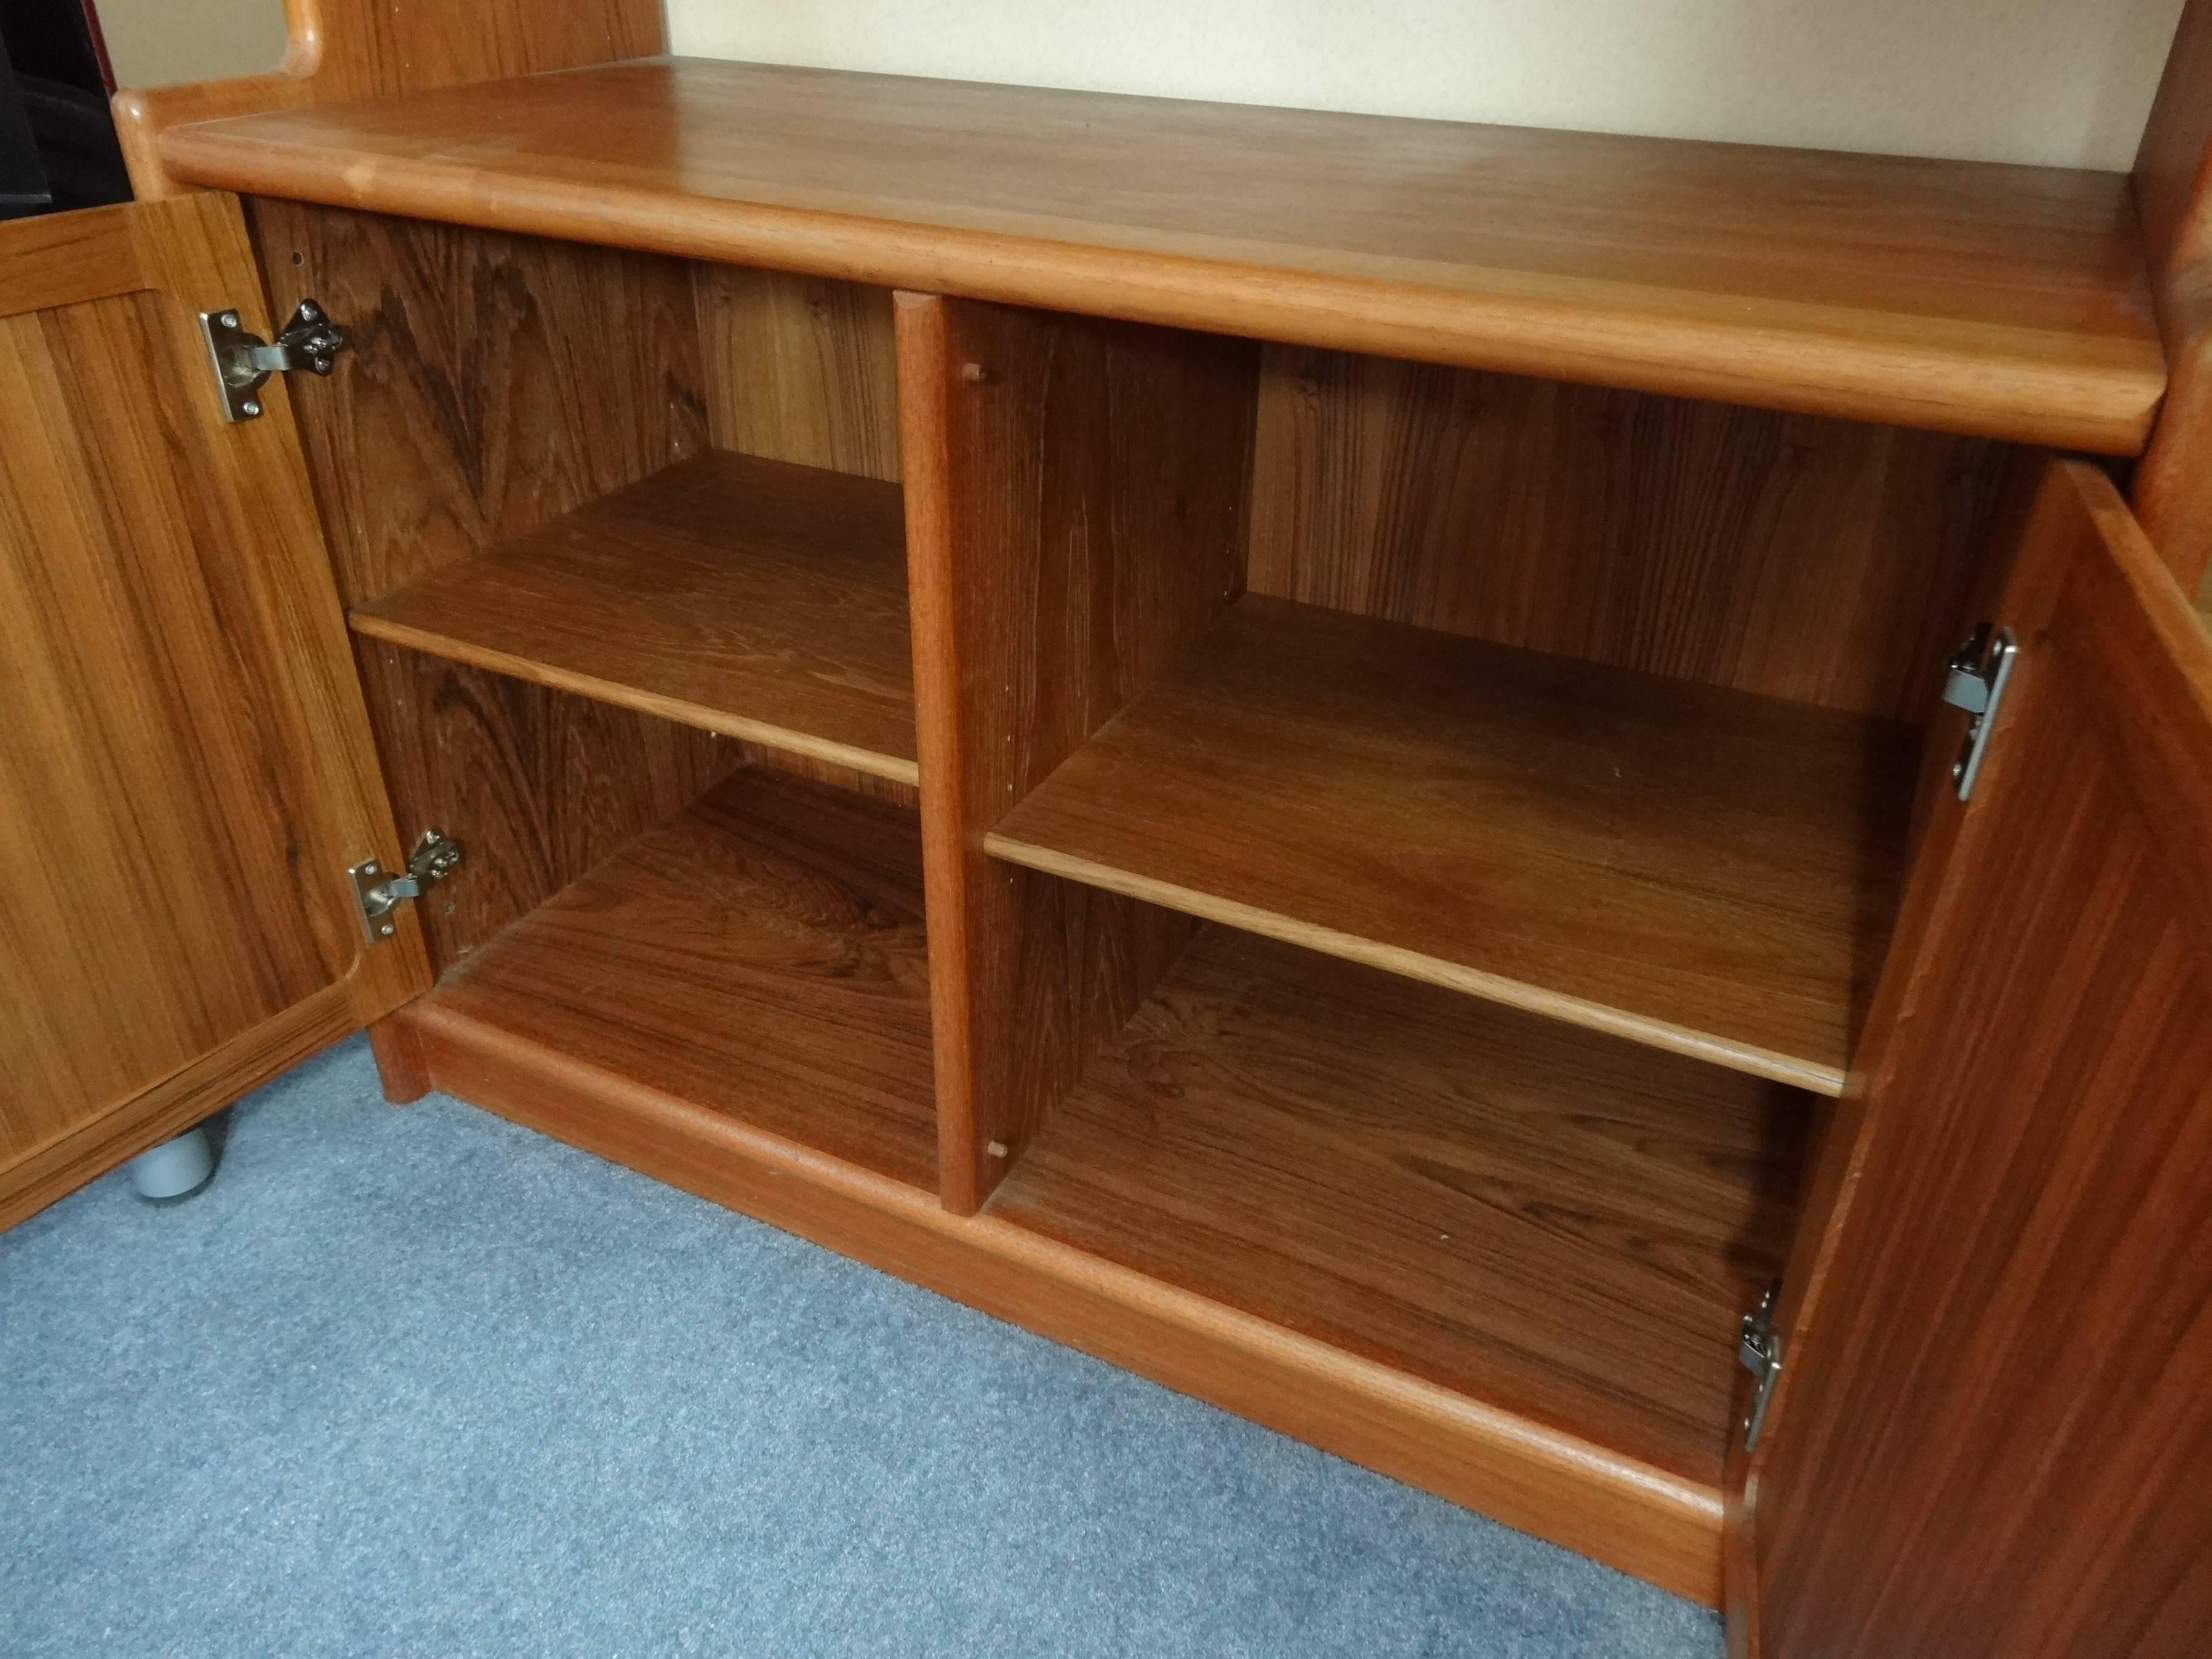 Vintage original Danish XXXL Dyrlund teak wall unit with lots of storage space and shelves, unit is in great condition, no scratches or stains!

Measures: Height 228 cm, depth 48 cm, width 261 cm.